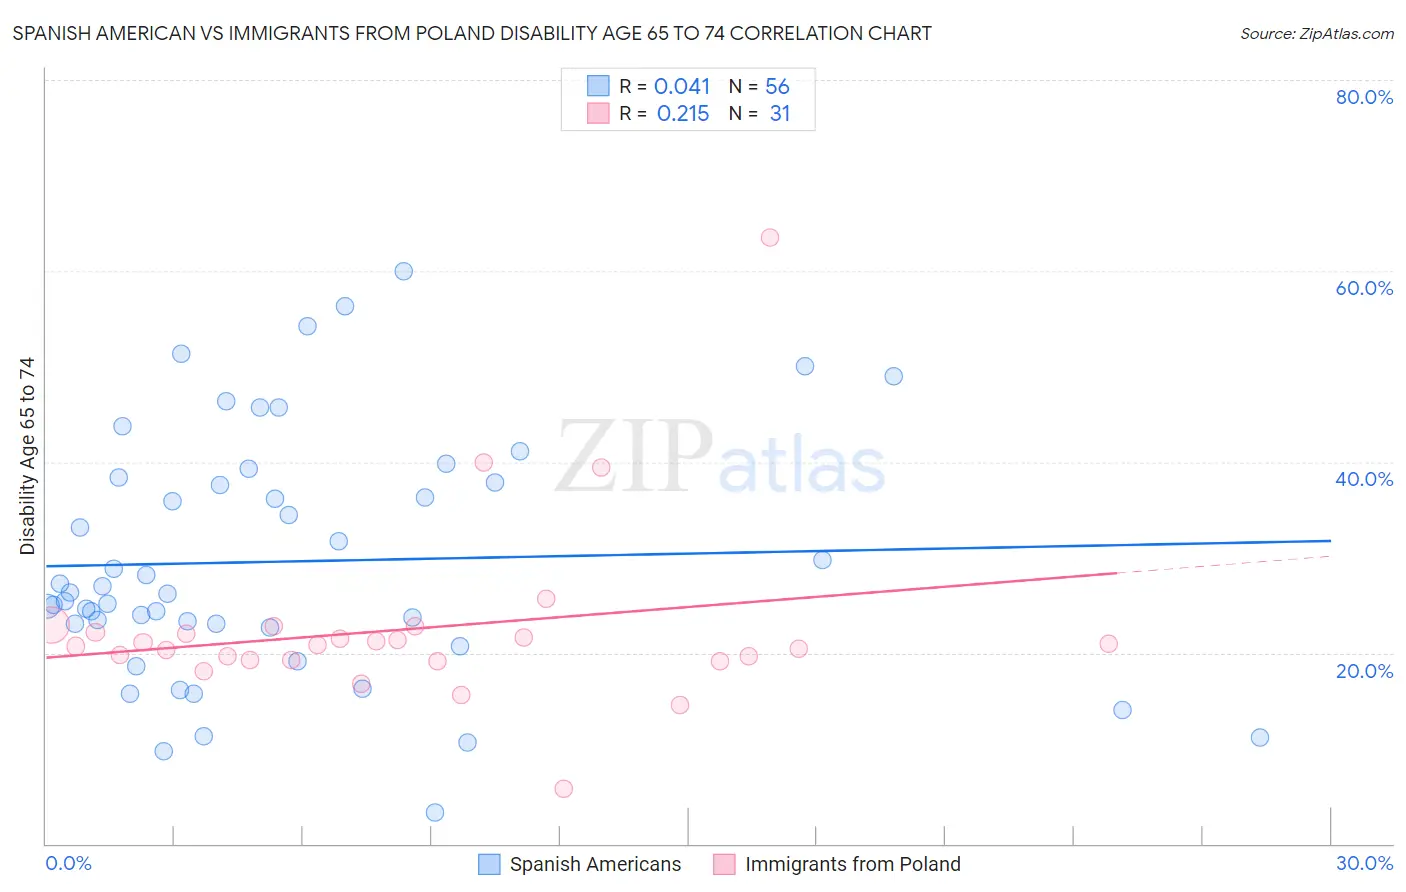 Spanish American vs Immigrants from Poland Disability Age 65 to 74